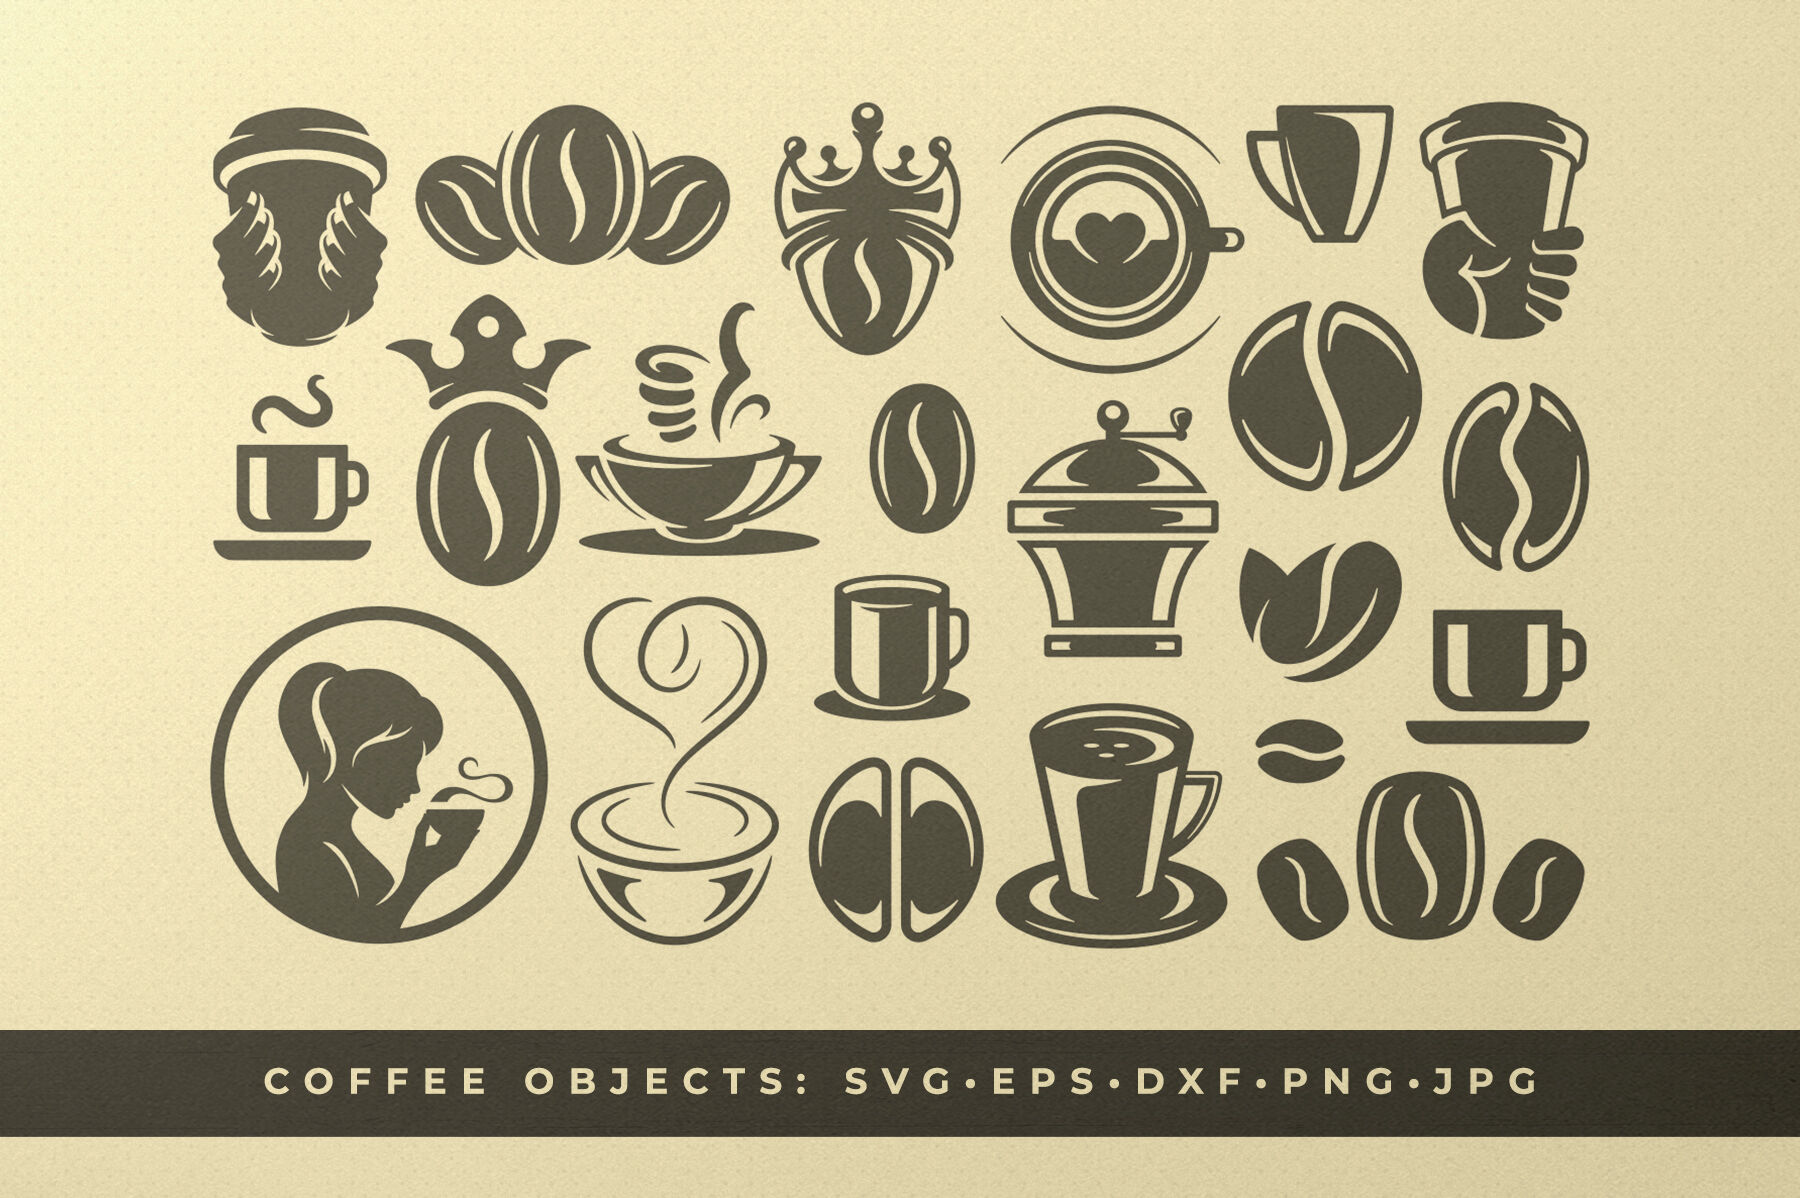 Download Coffee Beans And Cups Silhouettes And Icons Bundle Vector Illustration By Vasya Kobelev Thehungryjpeg Com